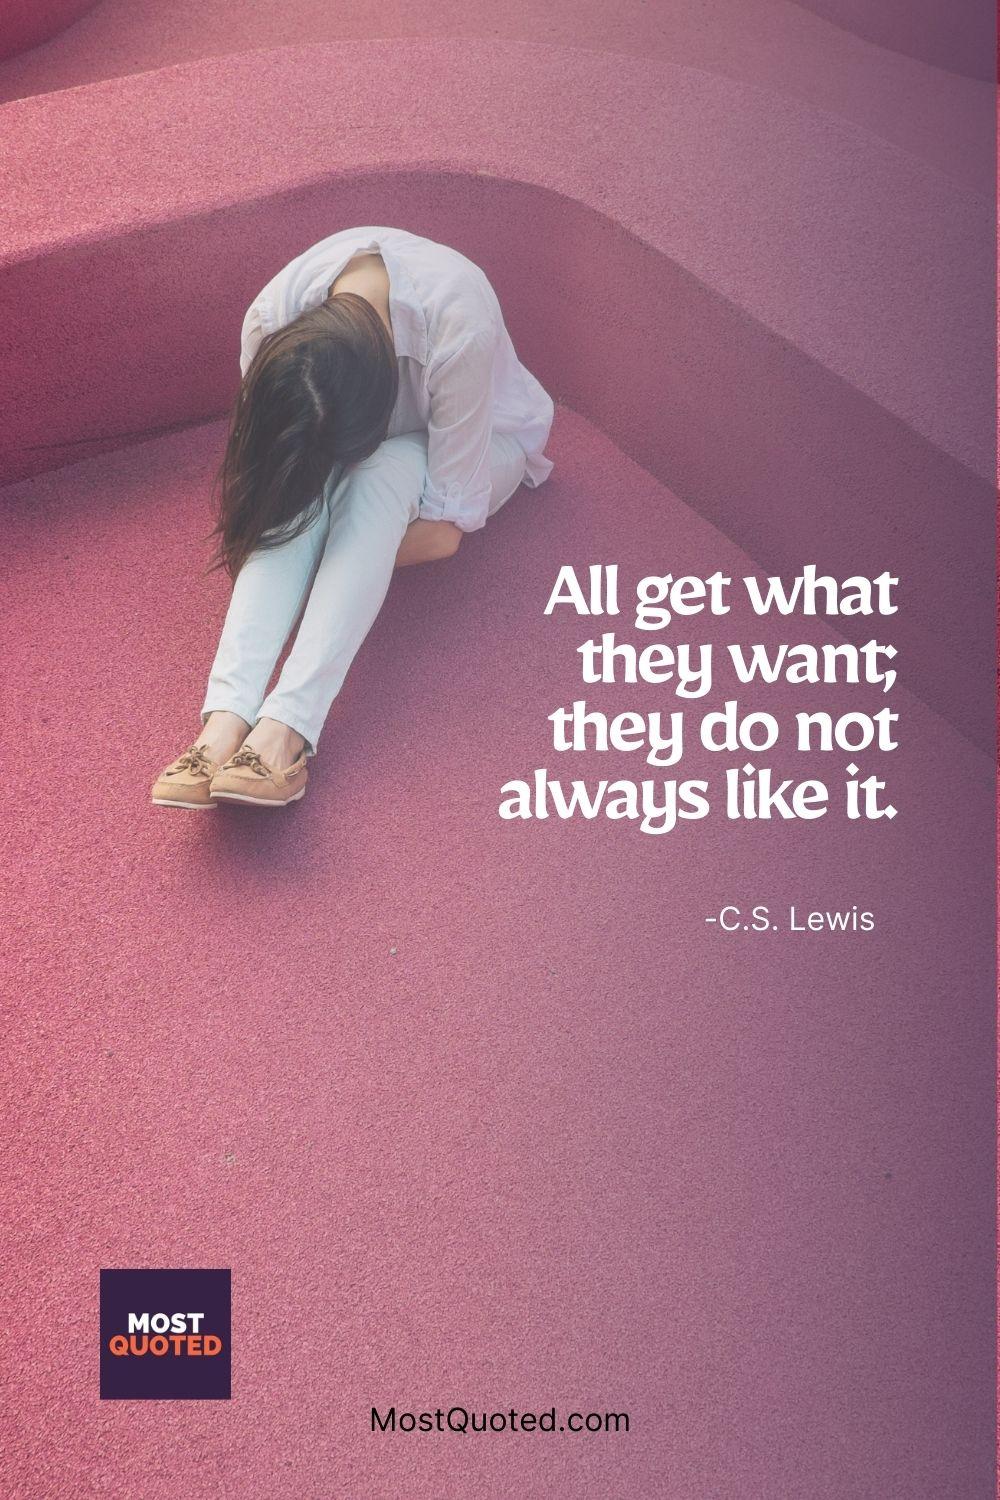 All get what they want; they do not always like it. - C.S. Lewis